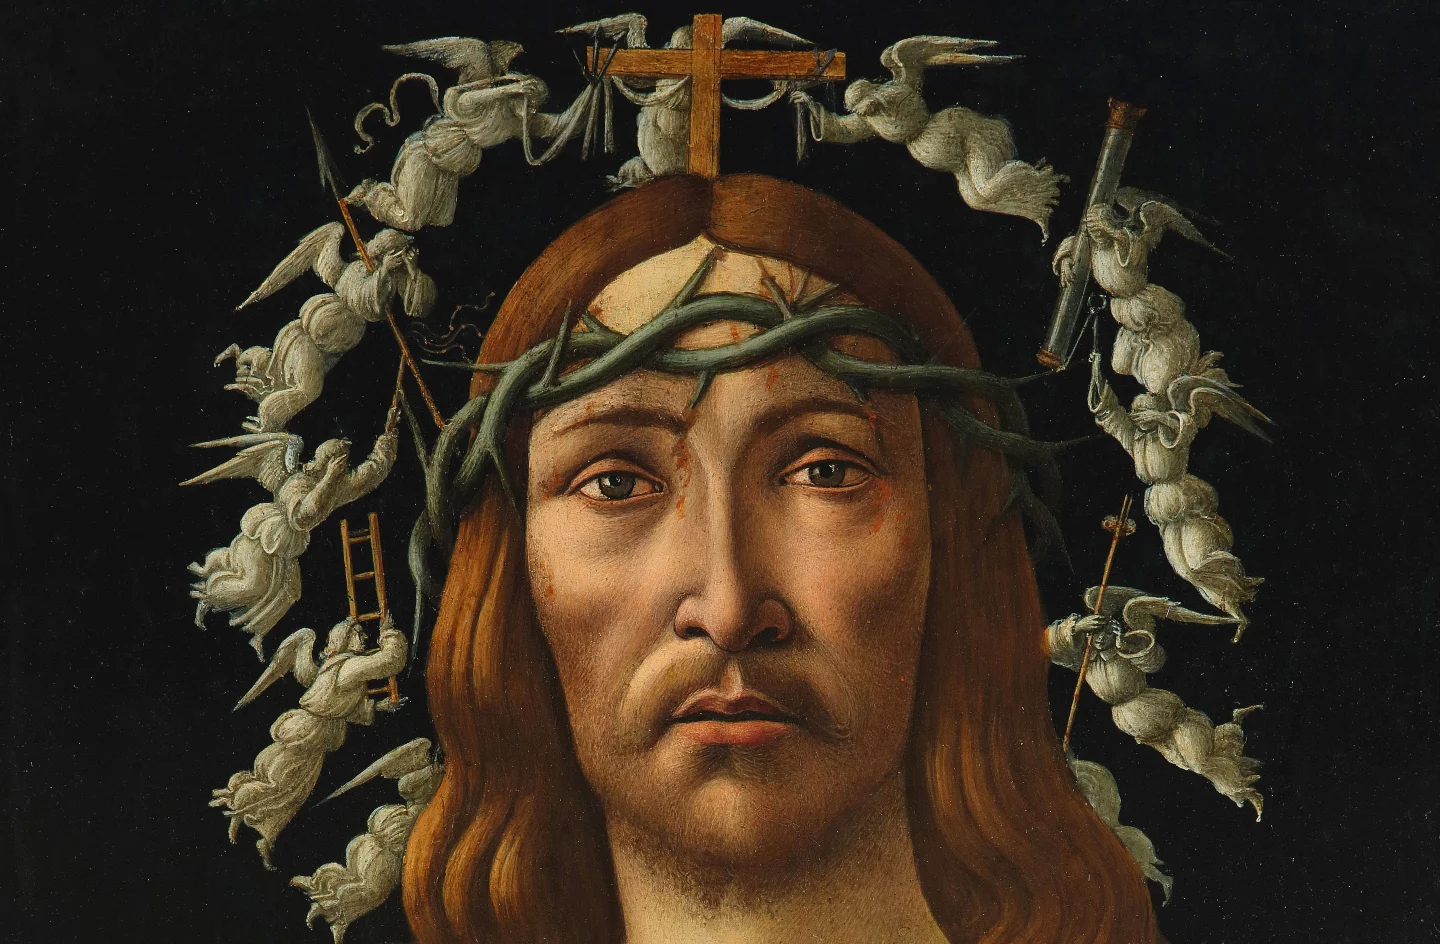 Botticelli, The Man of Sorrows, detail, Sotheby's